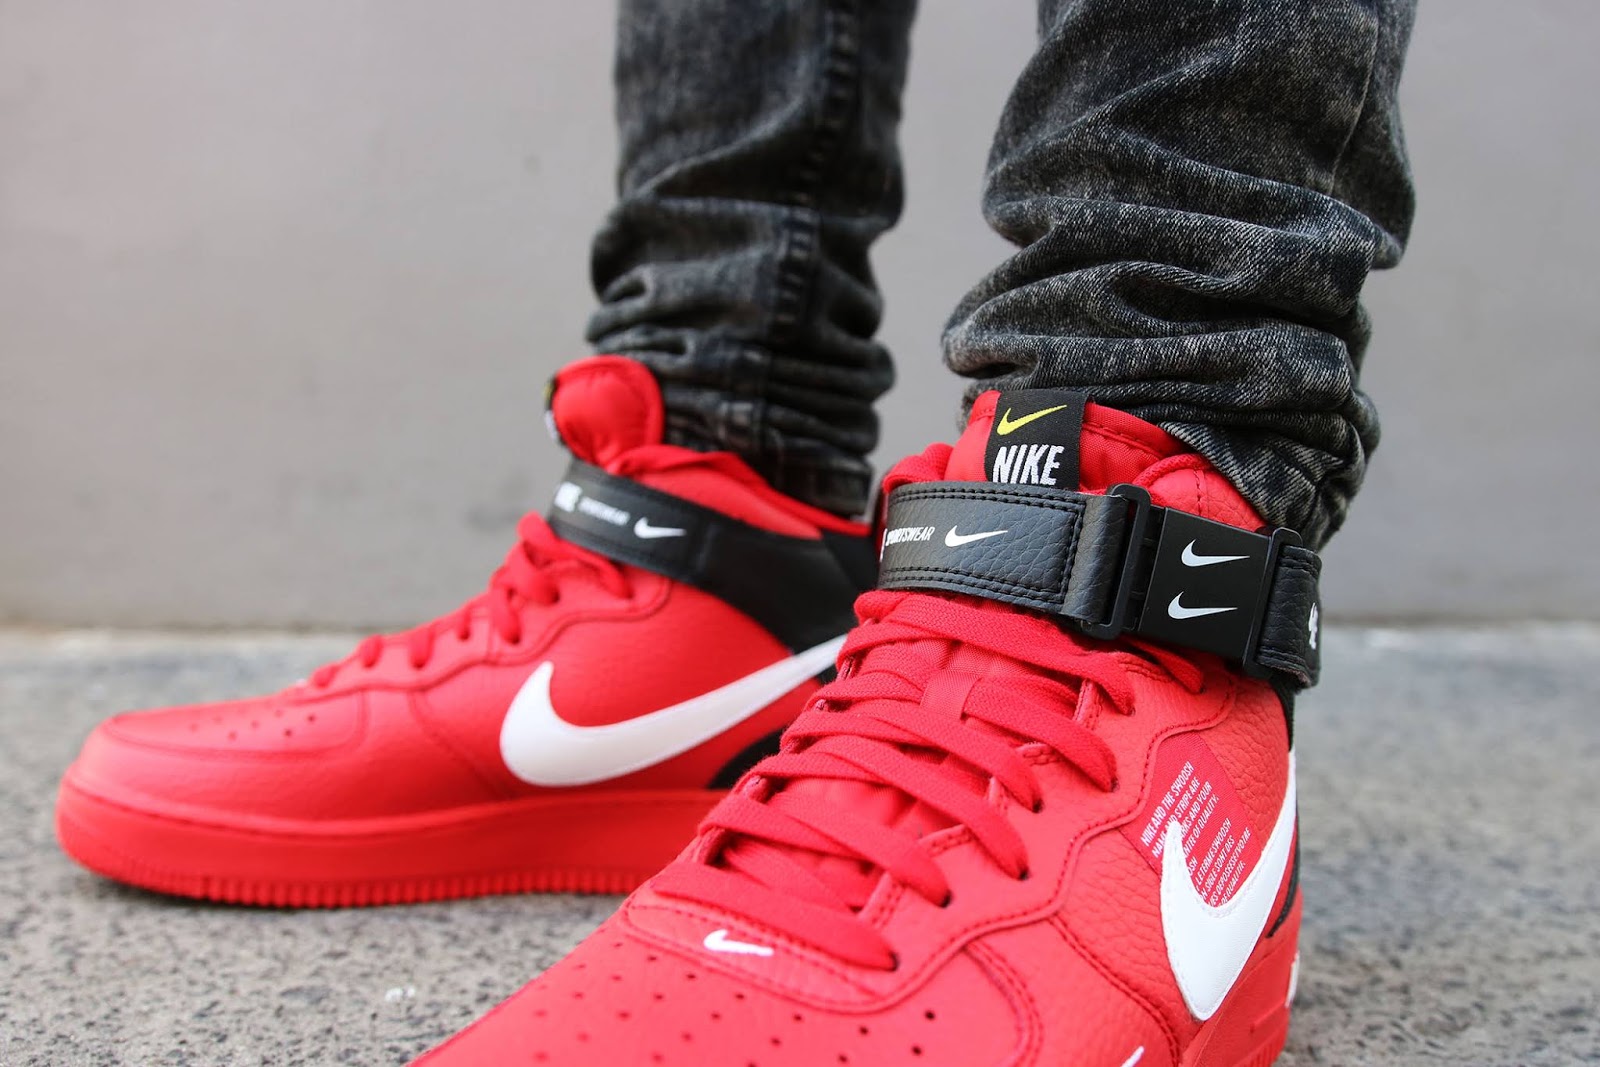 air force utility red mid